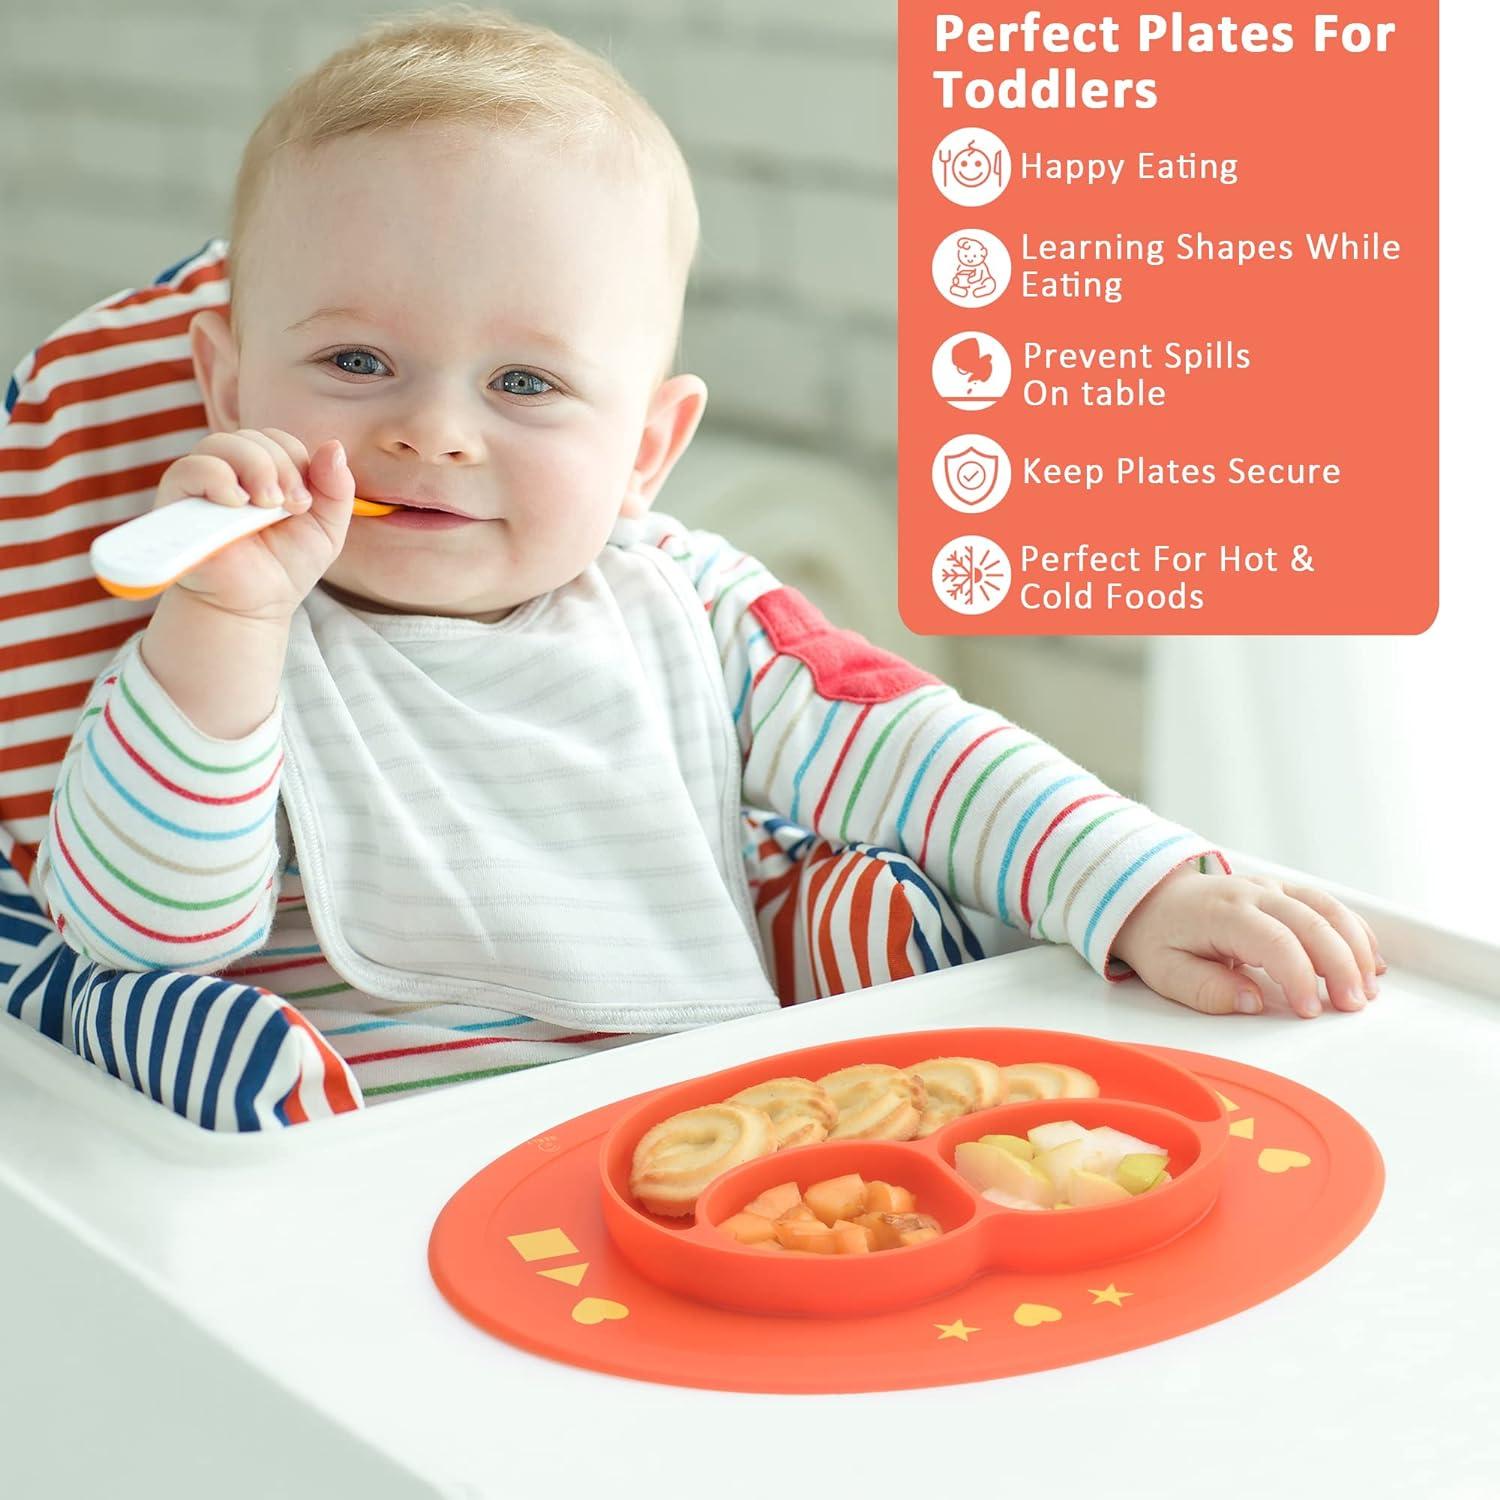 Silicone Baby Plate, Placemat Plates, Baby Food Mat